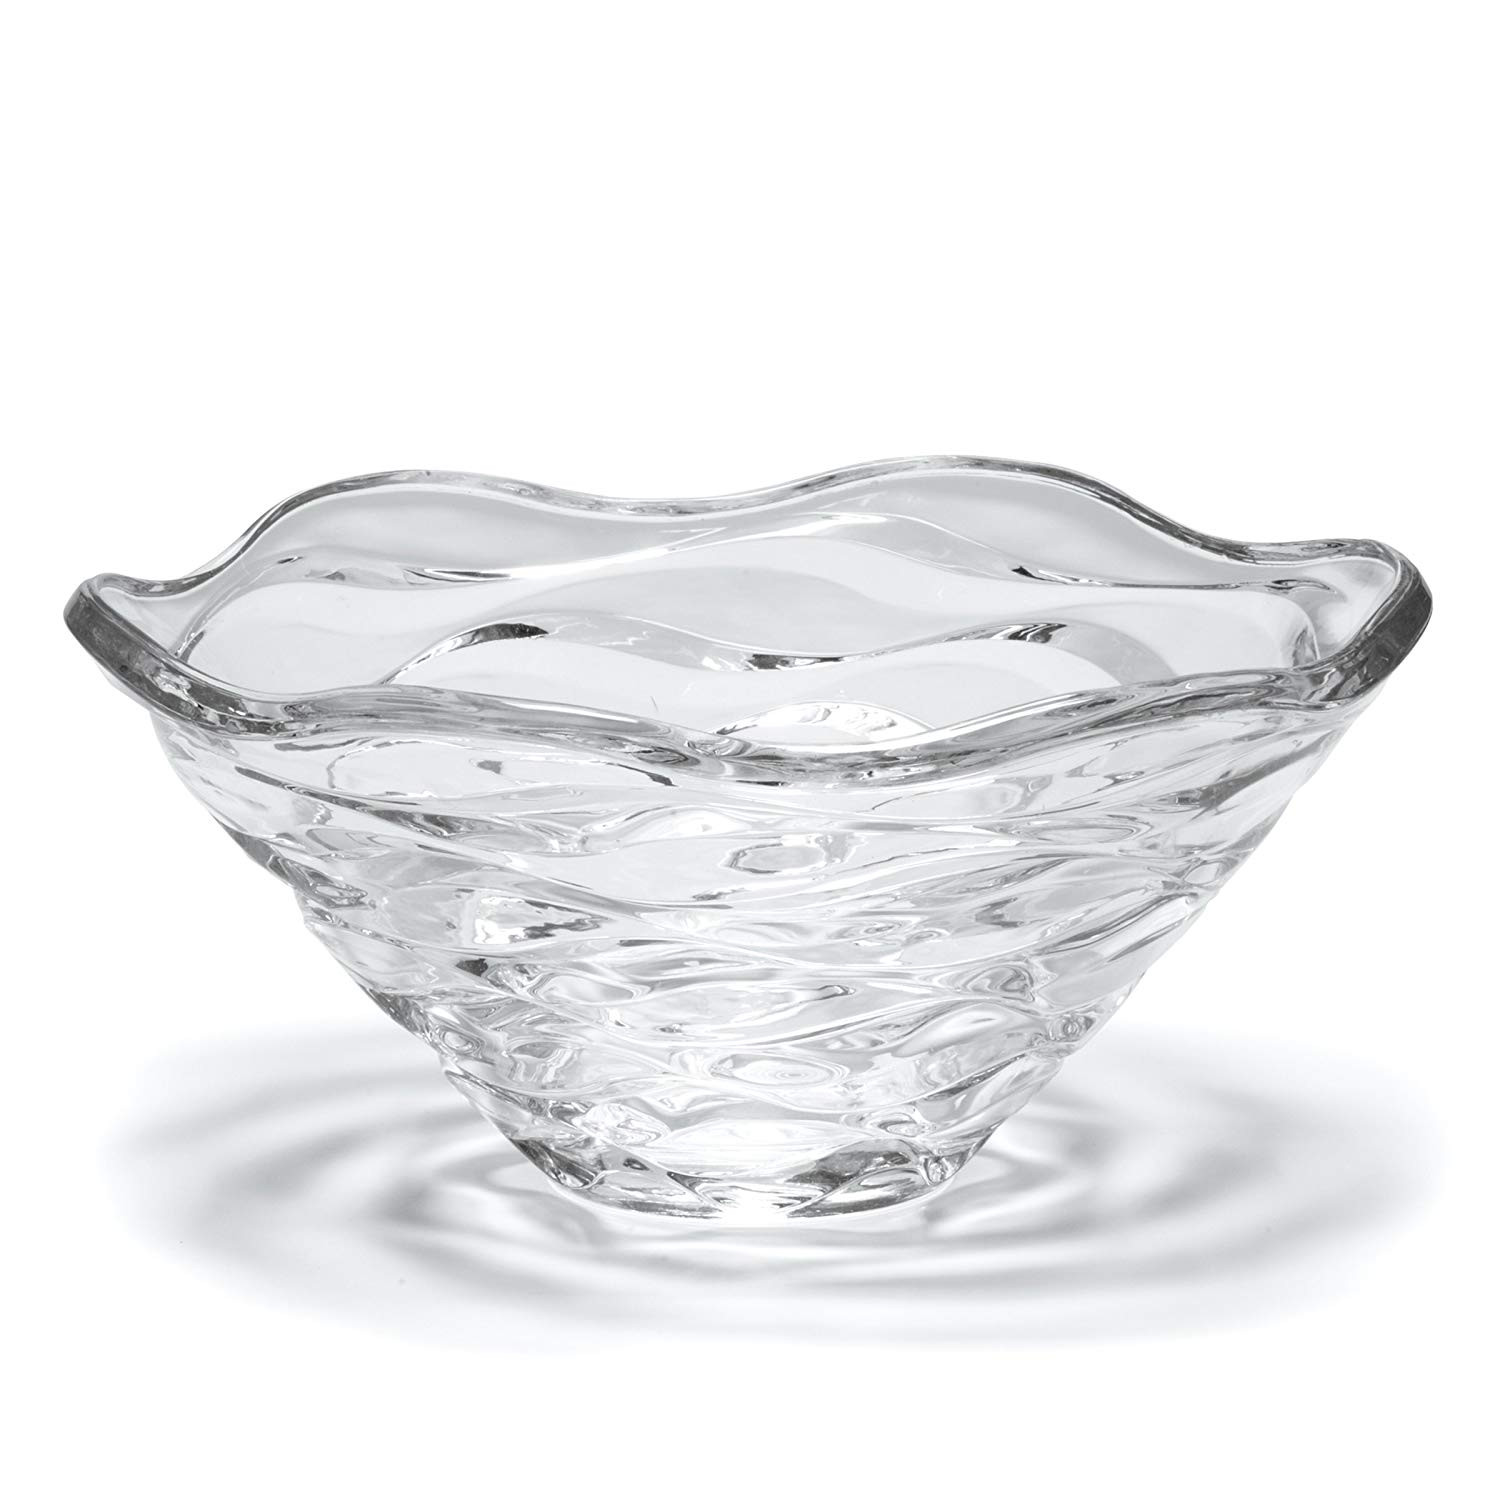 11 Lovable Marquis by Waterford Sheridan Flared 11 Crystal Vase 2024 free download marquis by waterford sheridan flared 11 crystal vase of amazon com mikasa atlantic crystal decorative bowl 11 5 inch with amazon com mikasa atlantic crystal decorative bowl 11 5 inch centerp